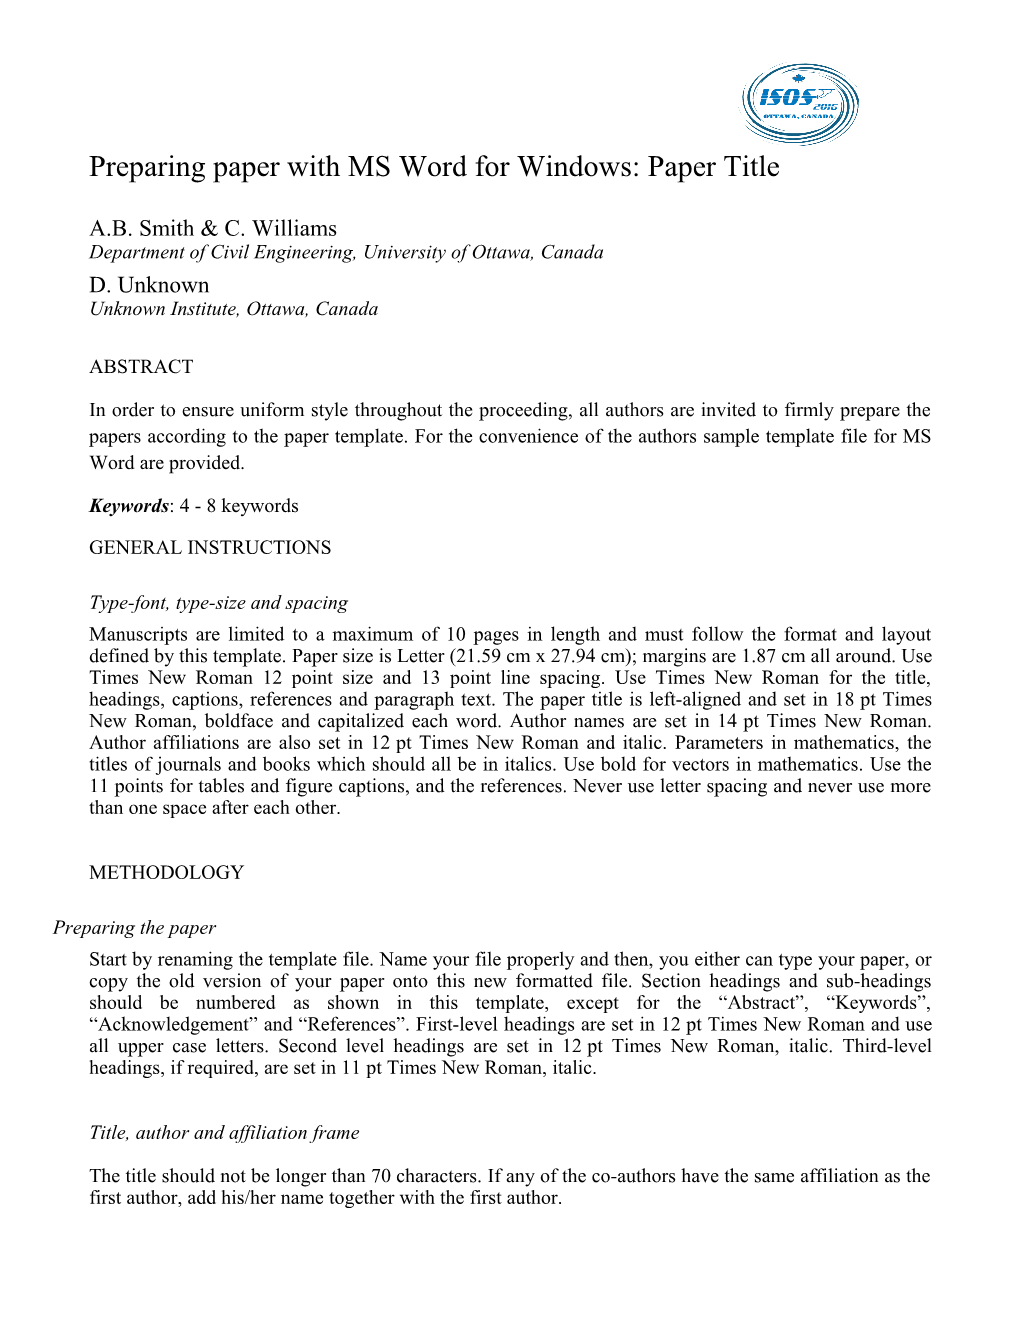 Preparing Paper with MS Word for Windows: Paper Title